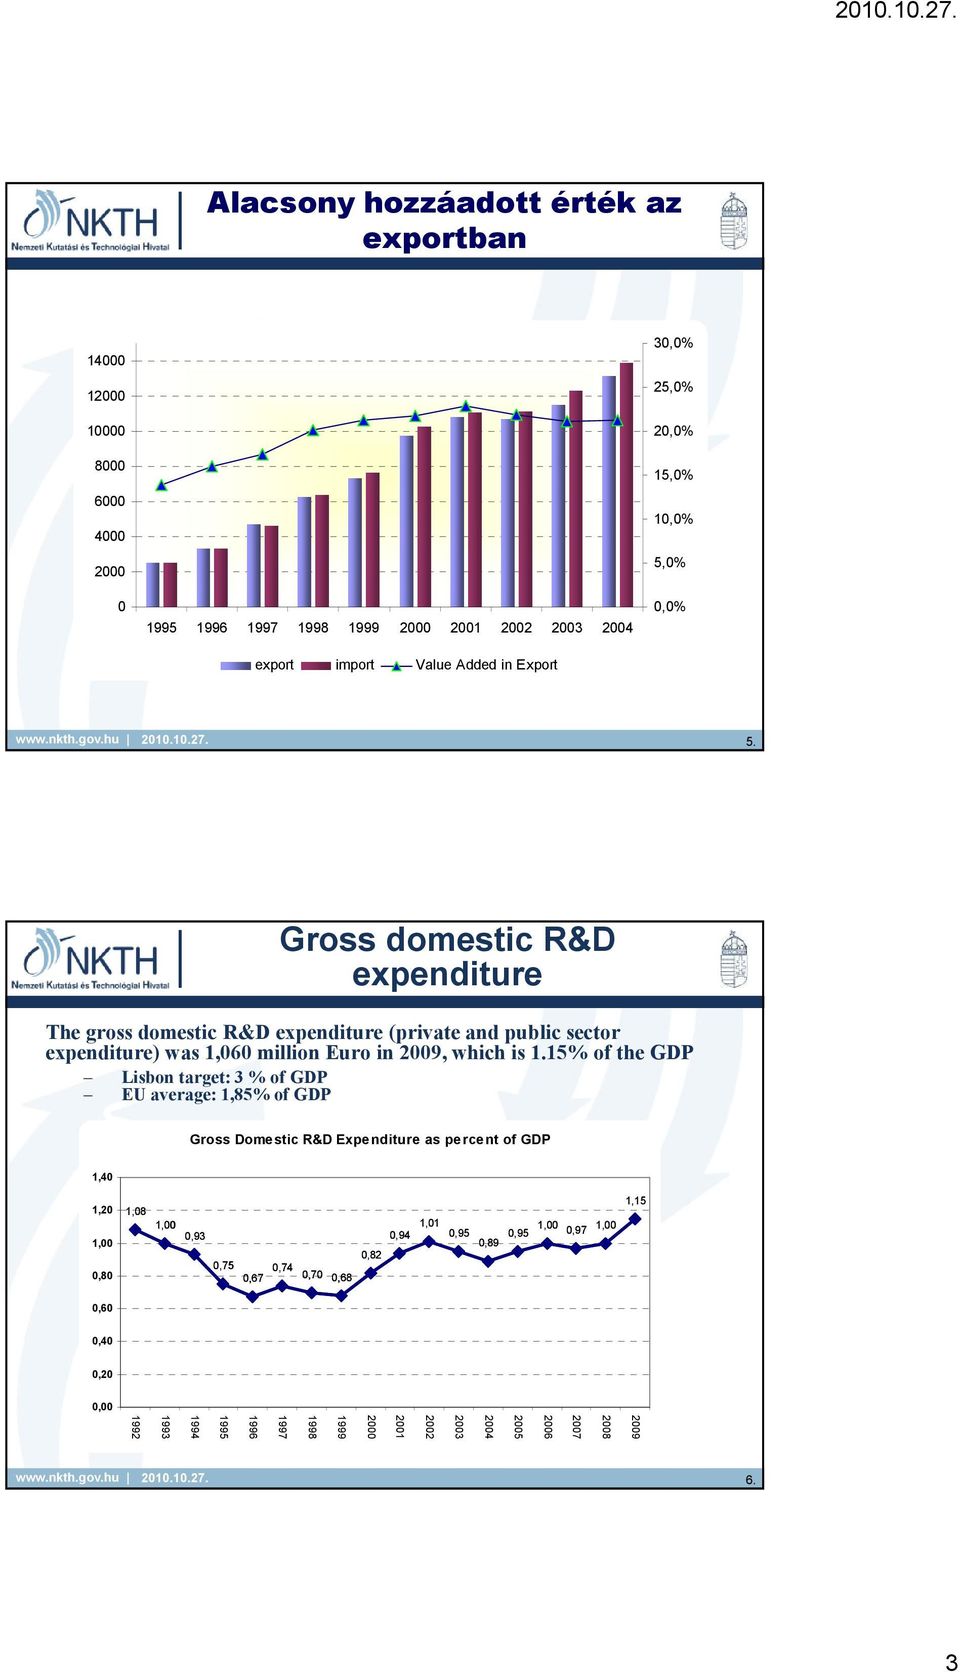 Gross domestic R&D expenditure The gross domestic R&D expenditure (private and public sector expenditure) was 1,060 million Euro in 2009, which is 1.